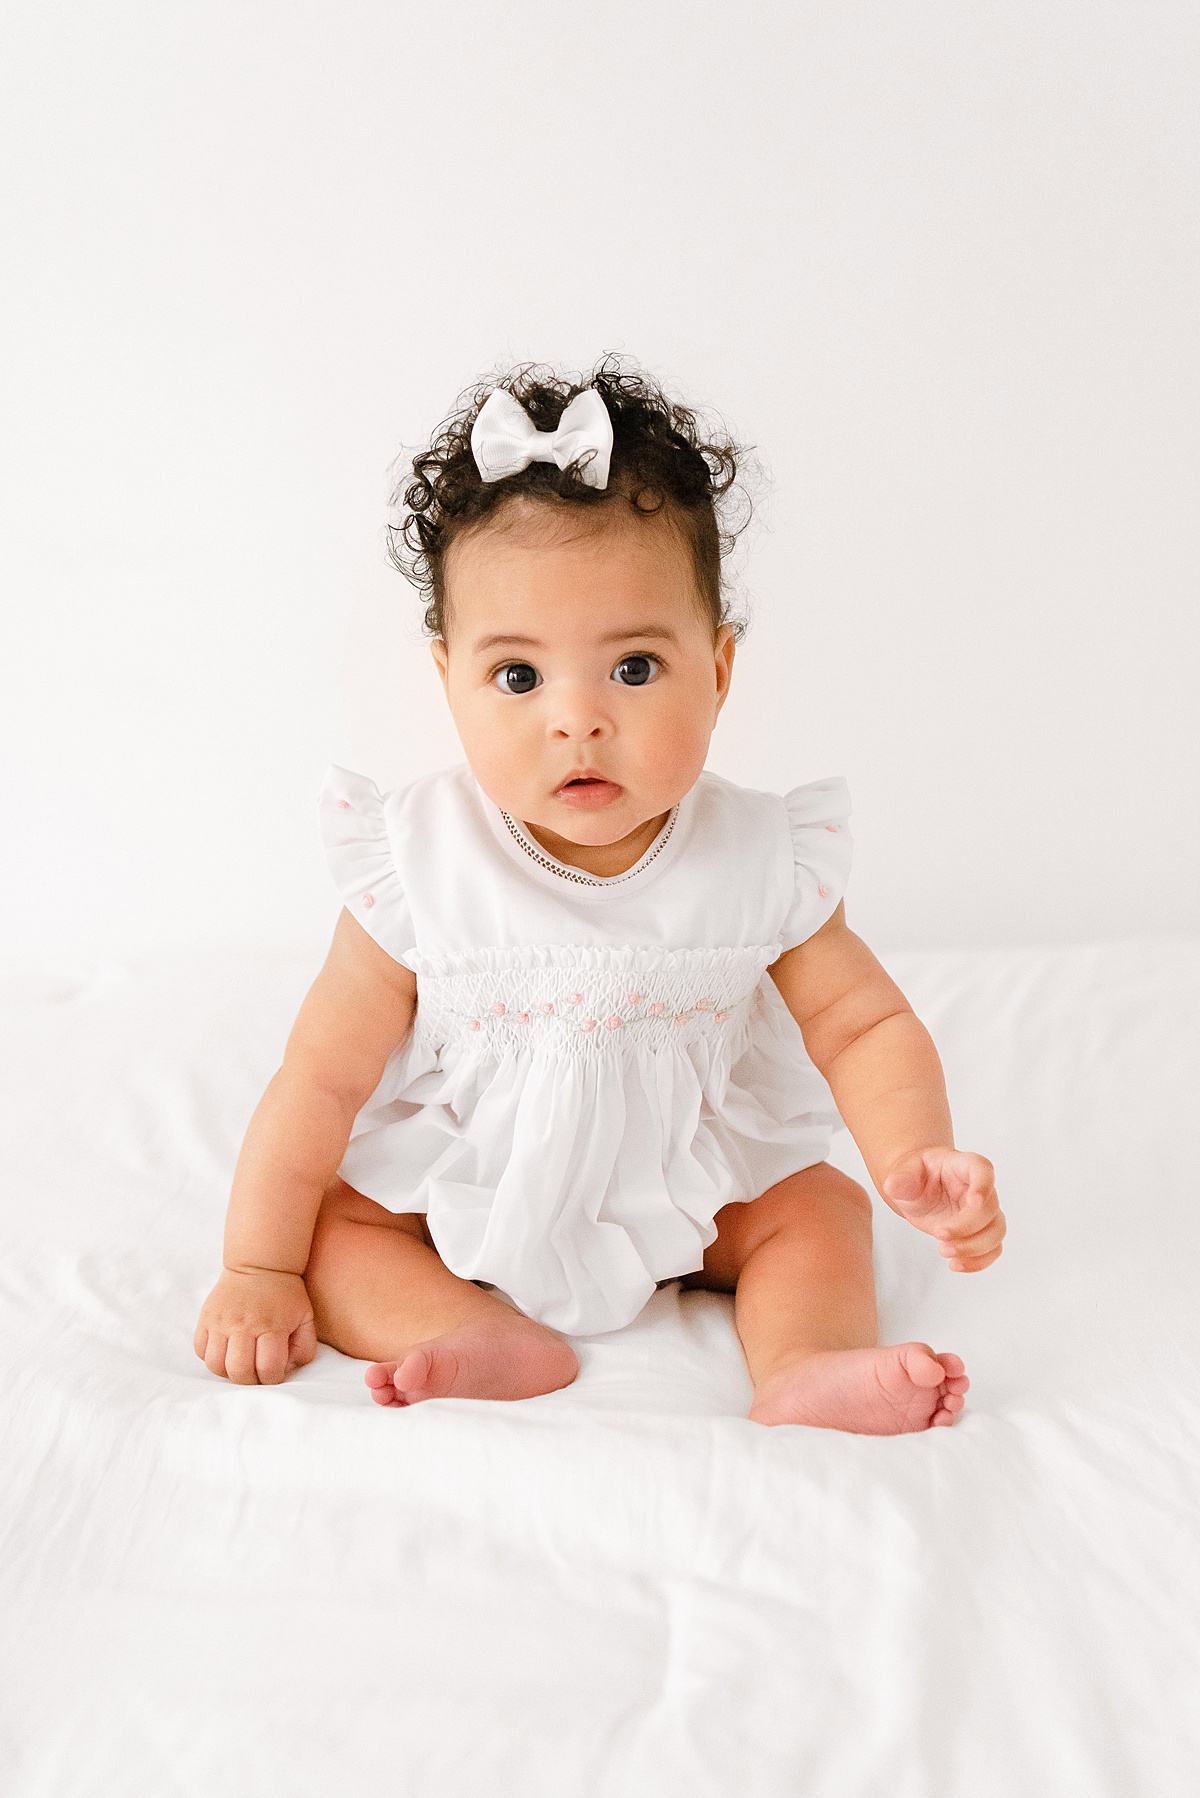 example of six month baby photo outfit